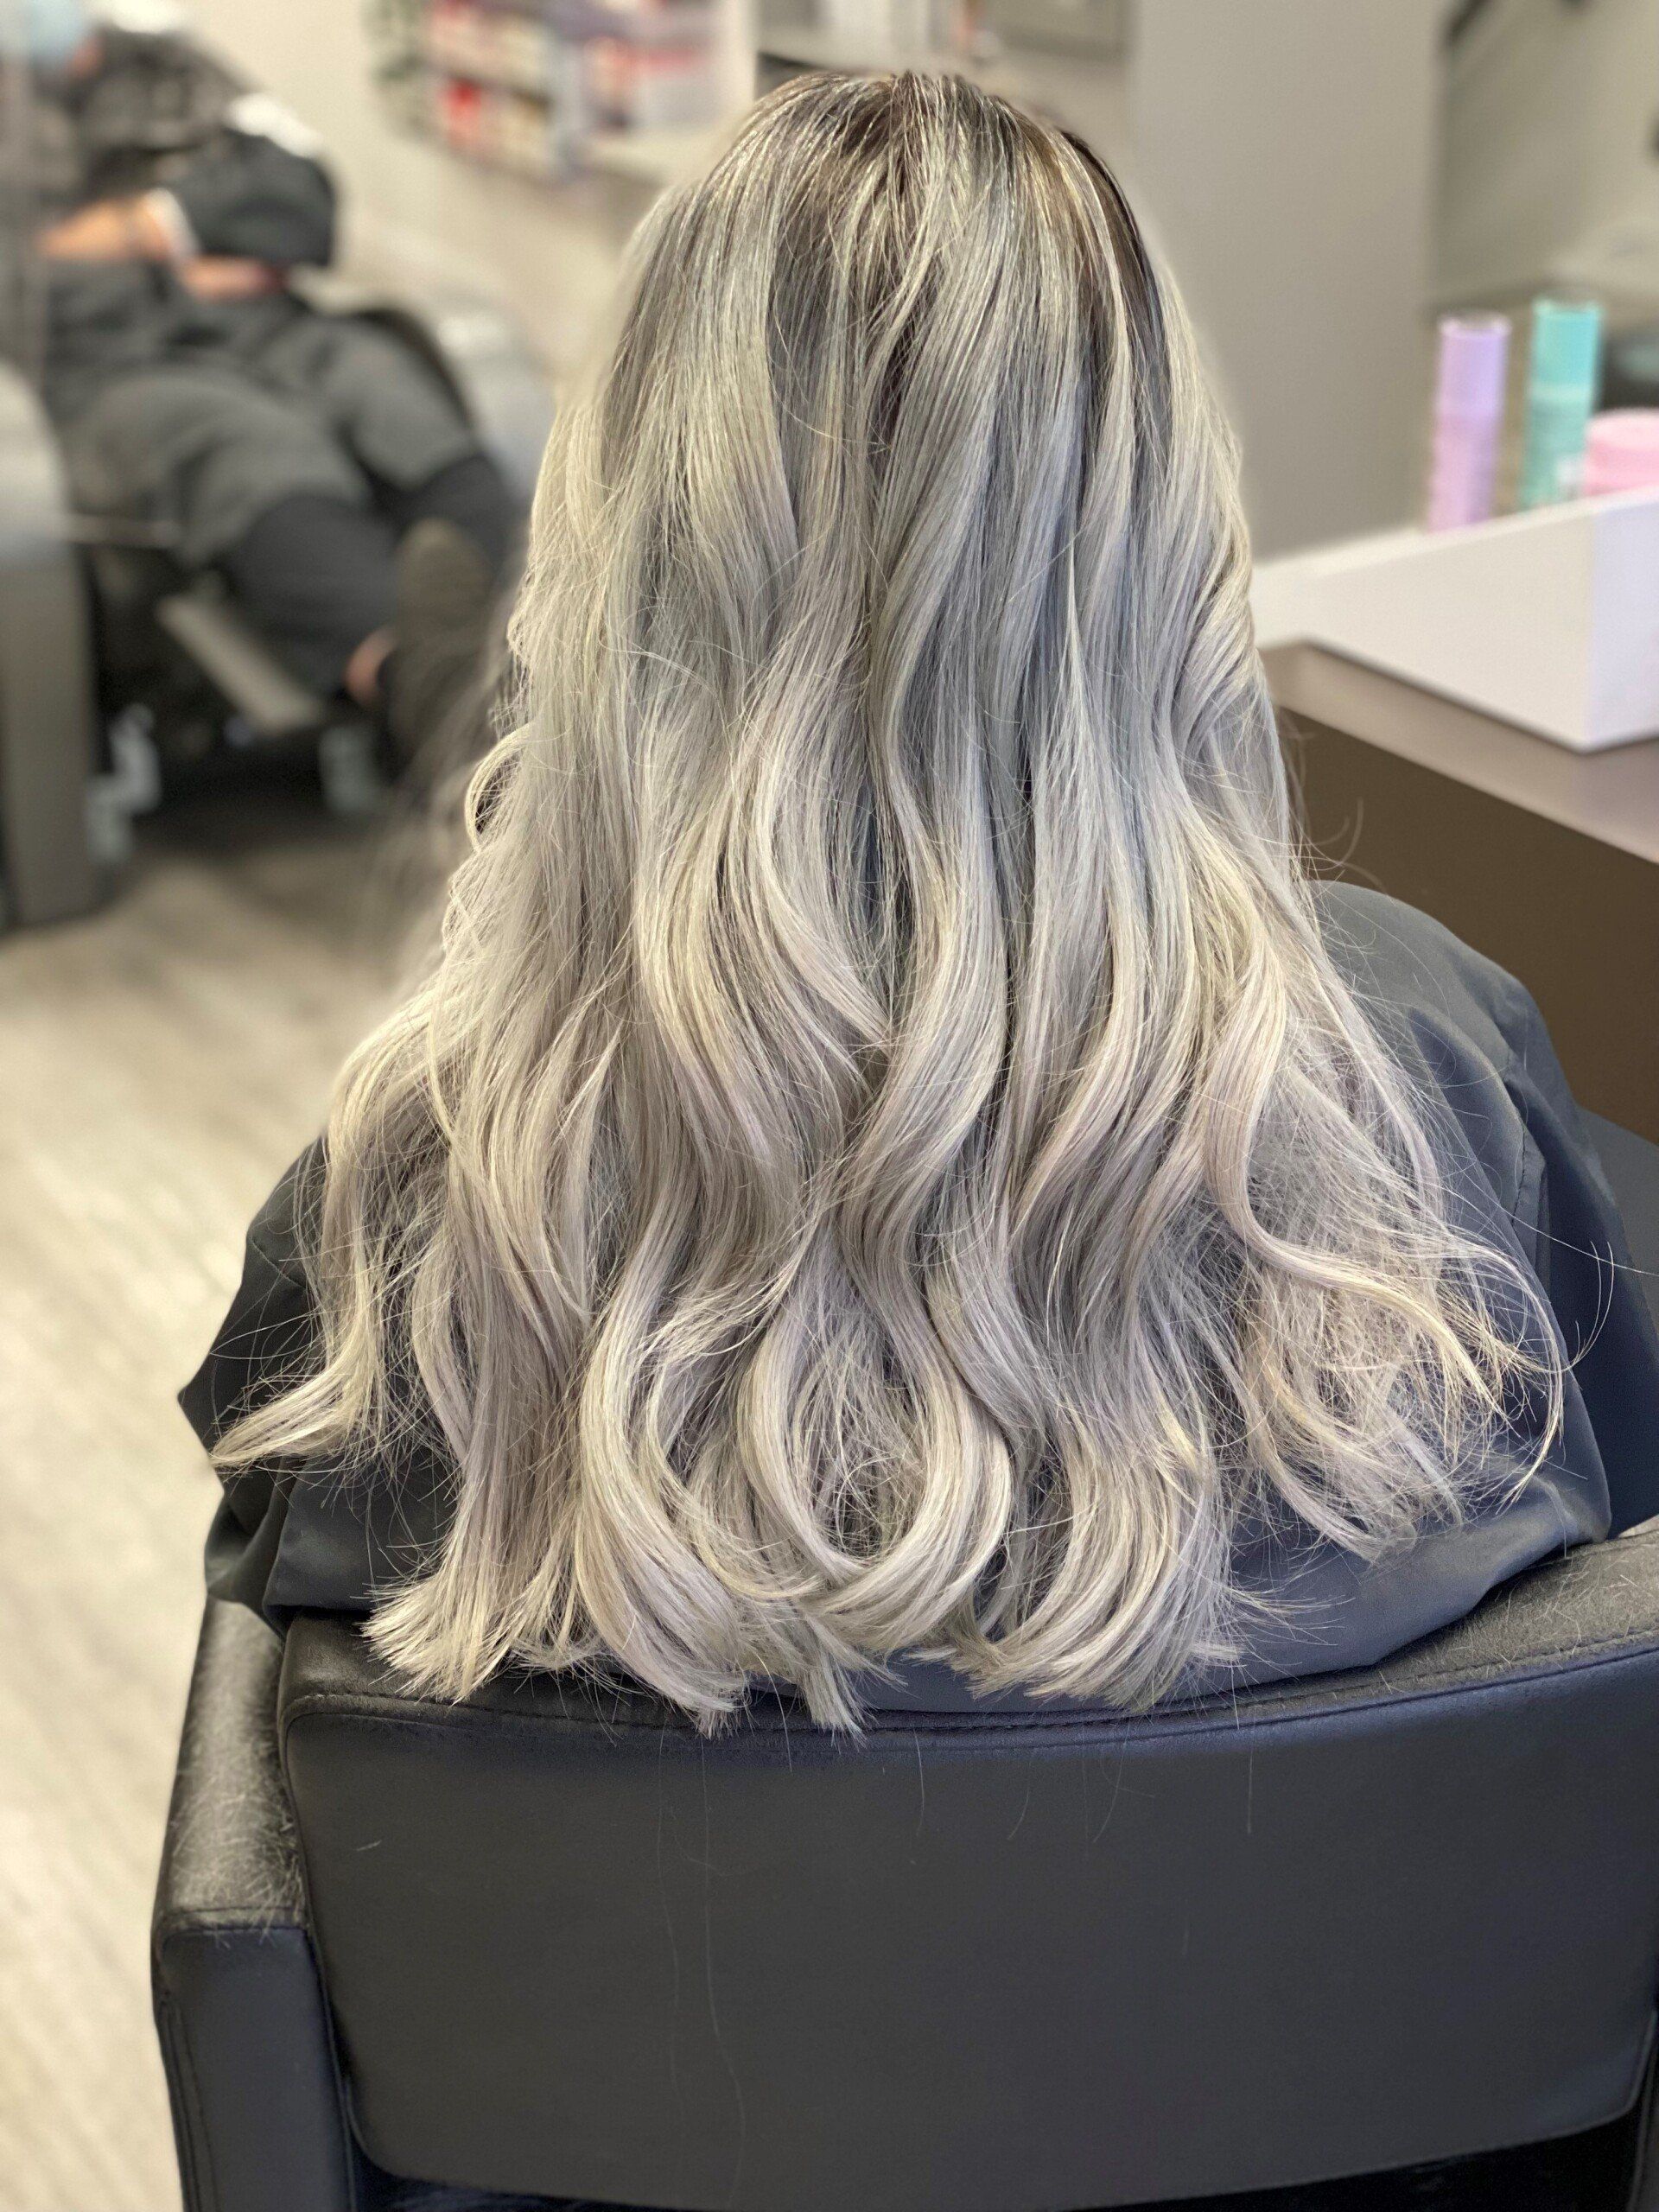 Cool Blonde Balayage hair created at Collective Hairdressing